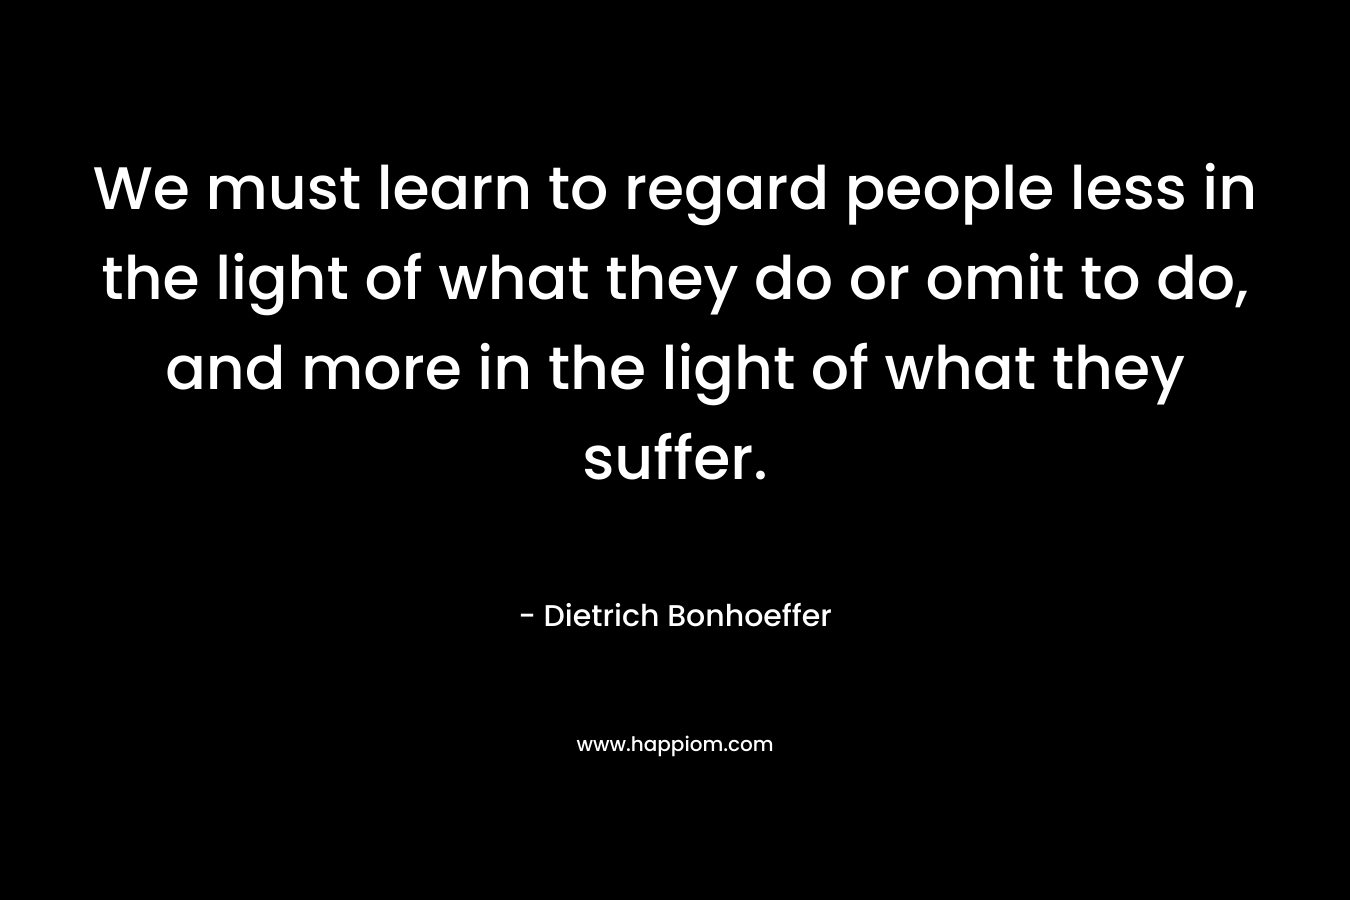 We must learn to regard people less in the light of what they do or omit to do, and more in the light of what they suffer.